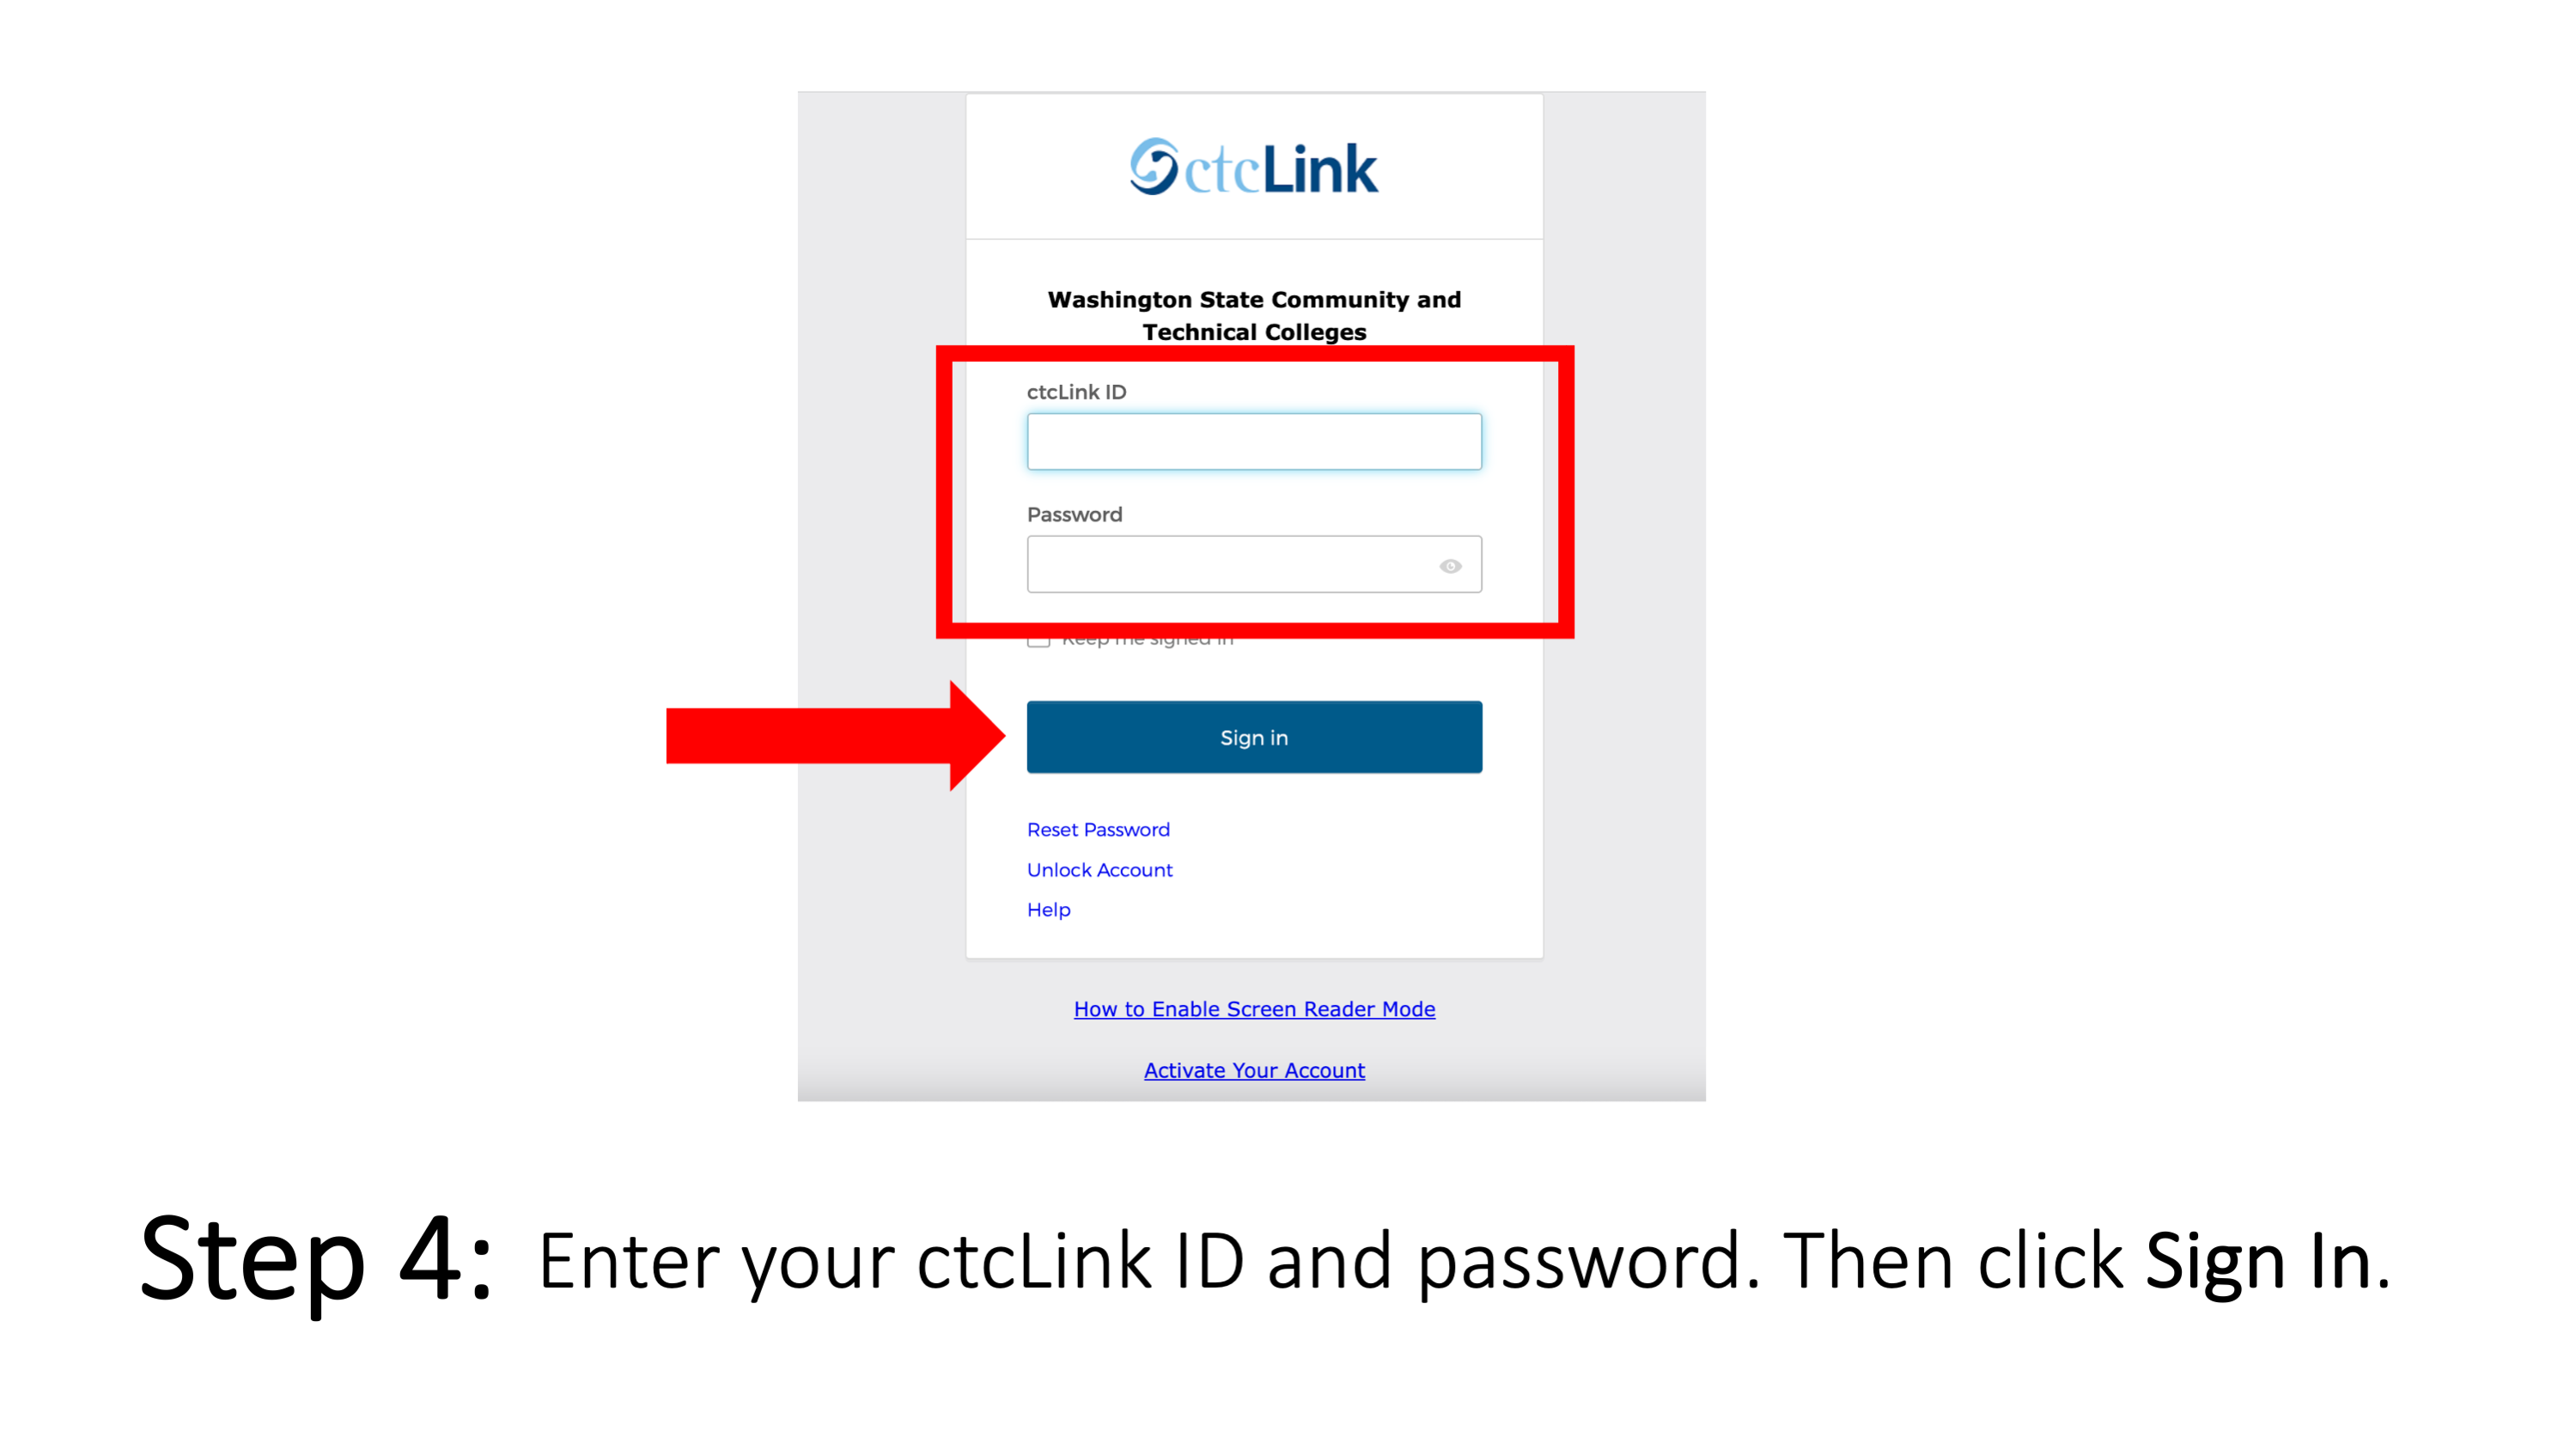 Step 4: Enter your ctcLink ID and password. Then click Sign In.